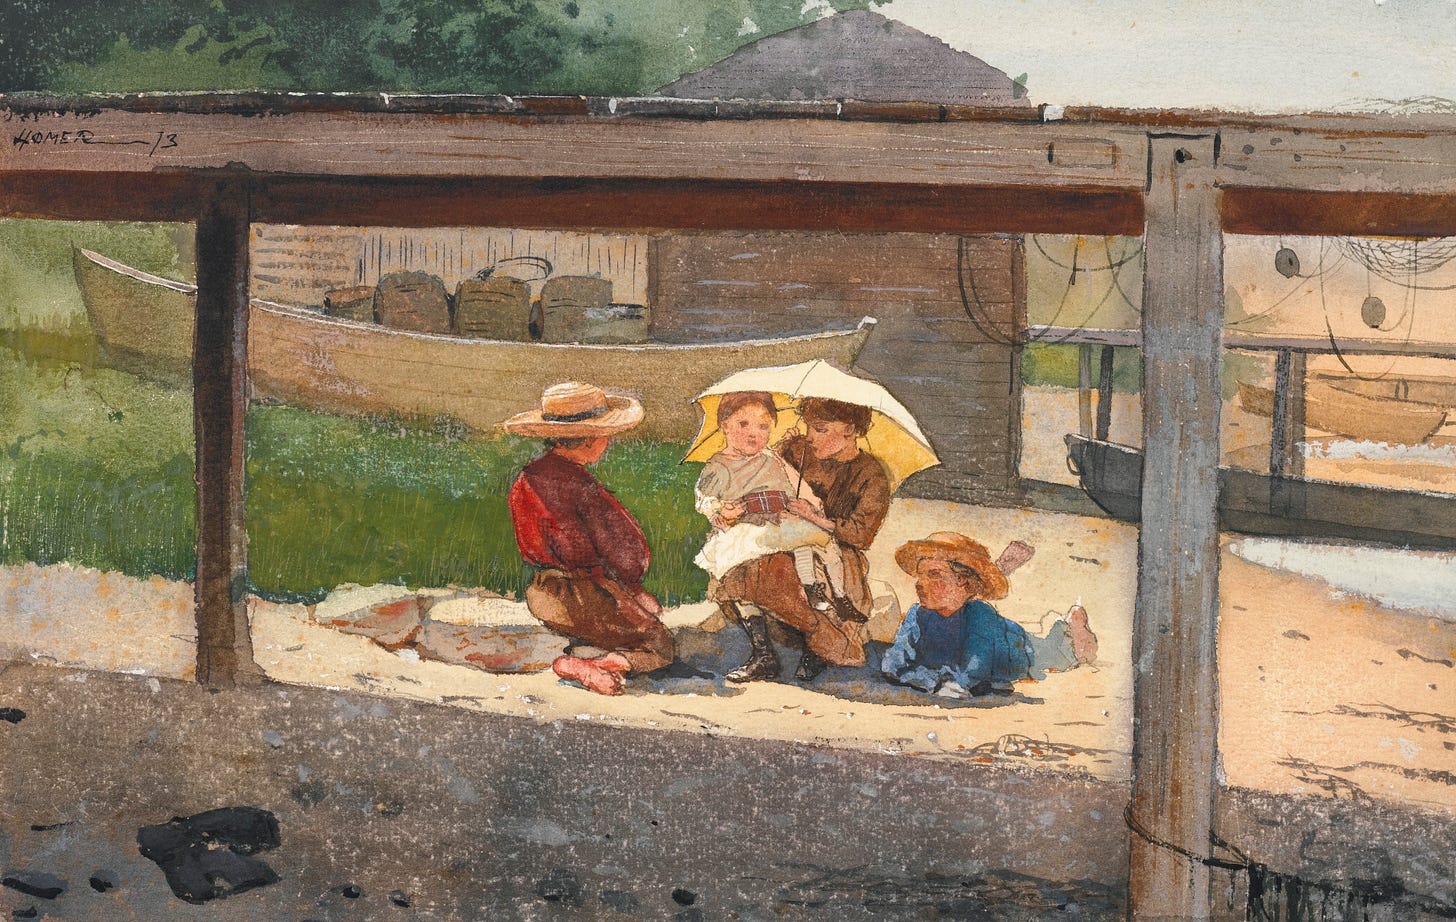 File:Winslow Homer - In Charge of Baby.jpg - Wikimedia Commons